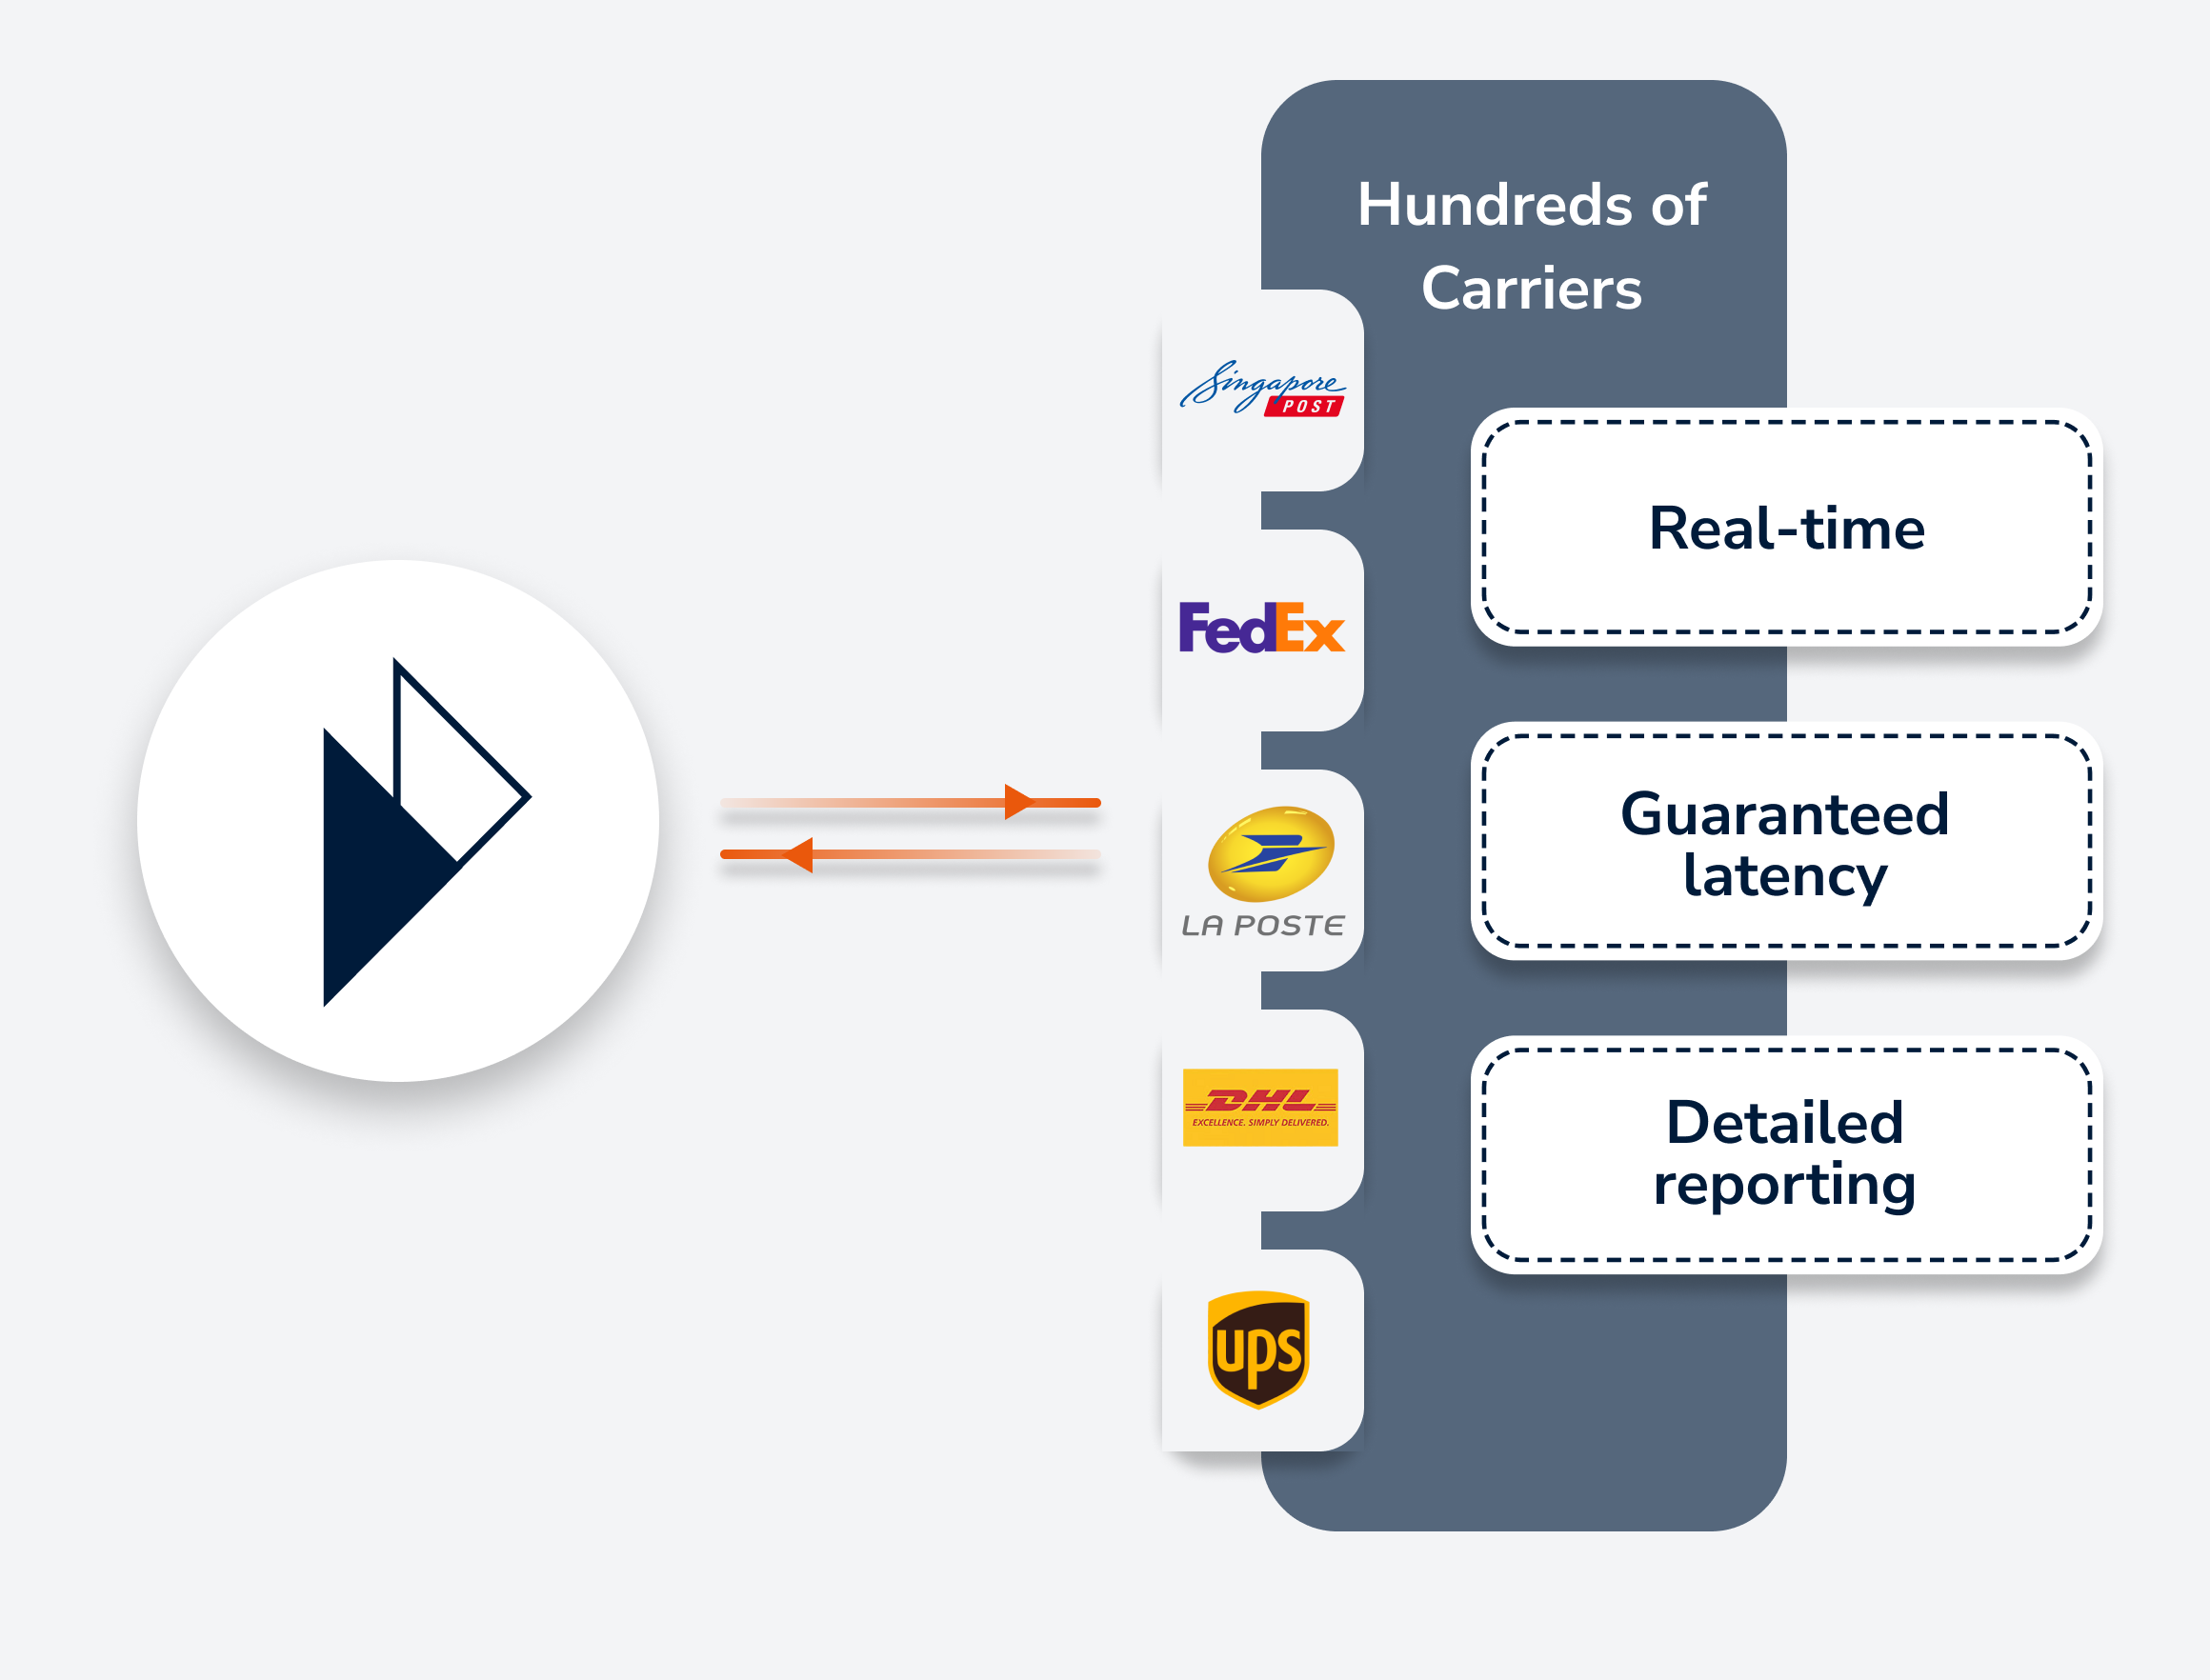 Parcel Perform and hundreds of carriers updating real-time, detailed reporting with guaranteed latency back and forth